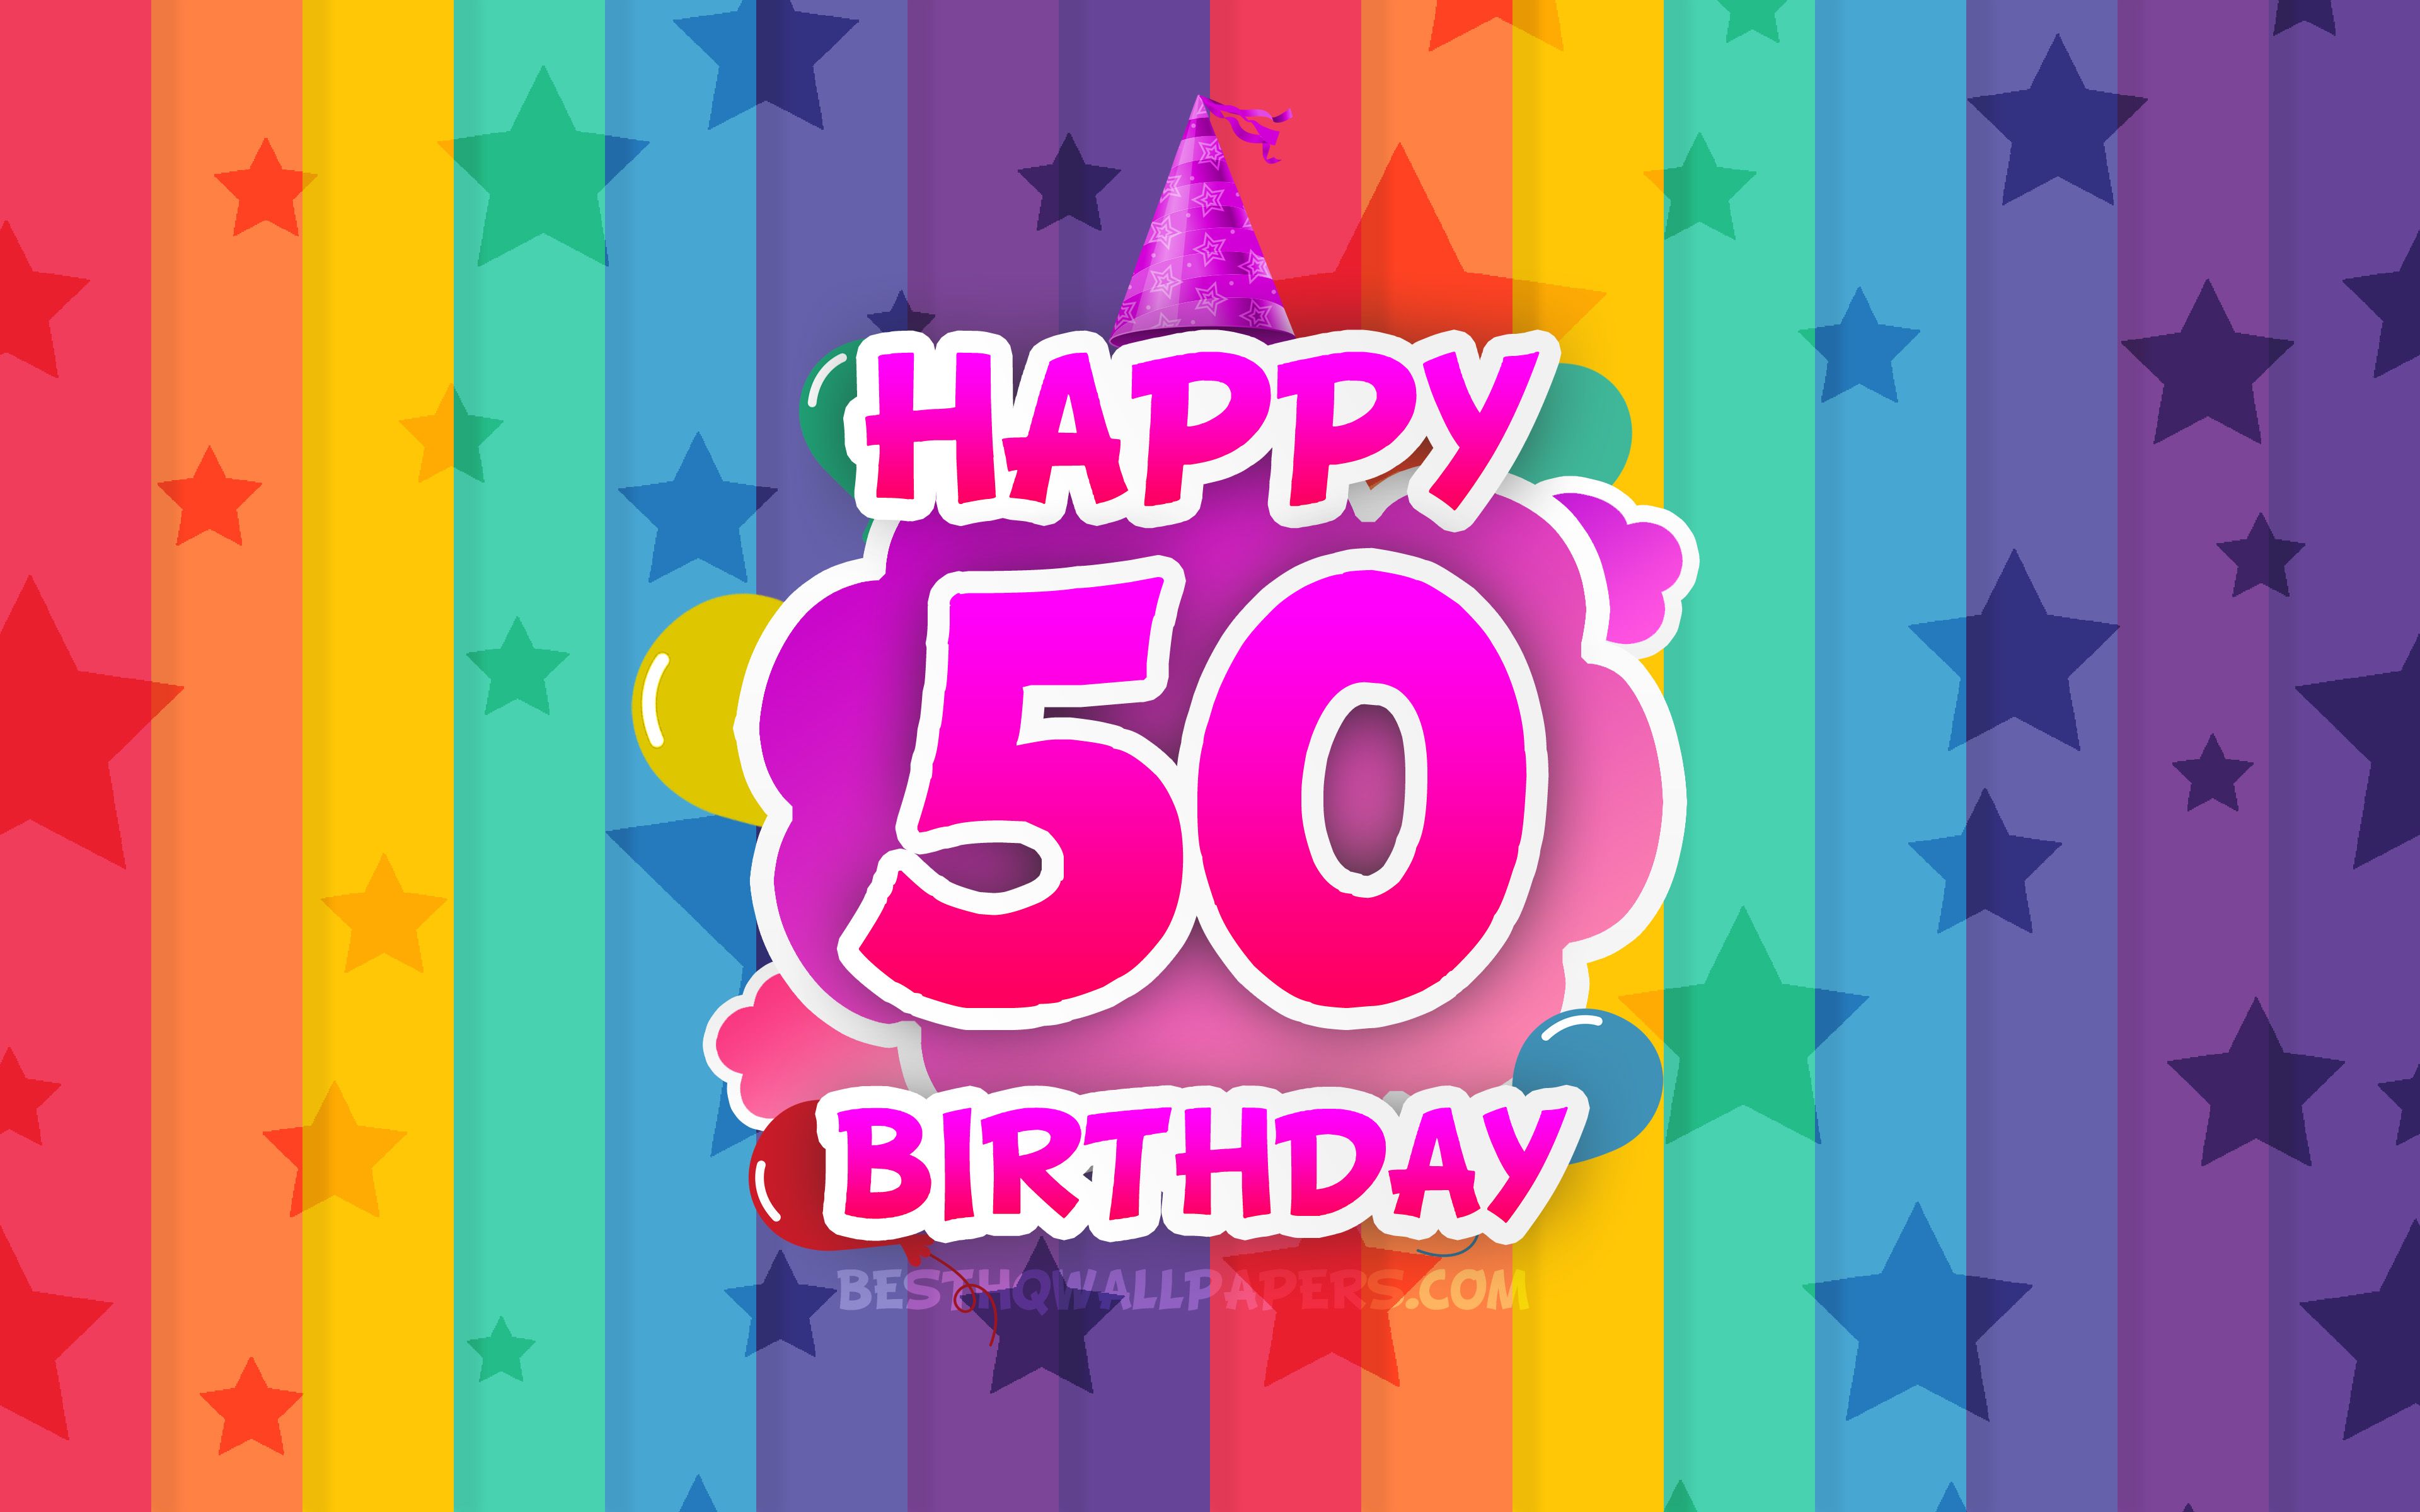 Download wallpaper Happy 50th birthday, colorful clouds, 4k, Birthday concept, rainbow background, Happy 50 Years Birthday, creative 3D letters, 50th Birthday, Birthday Party, 50th Birthday Party for desktop with resolution 3840x2400. High